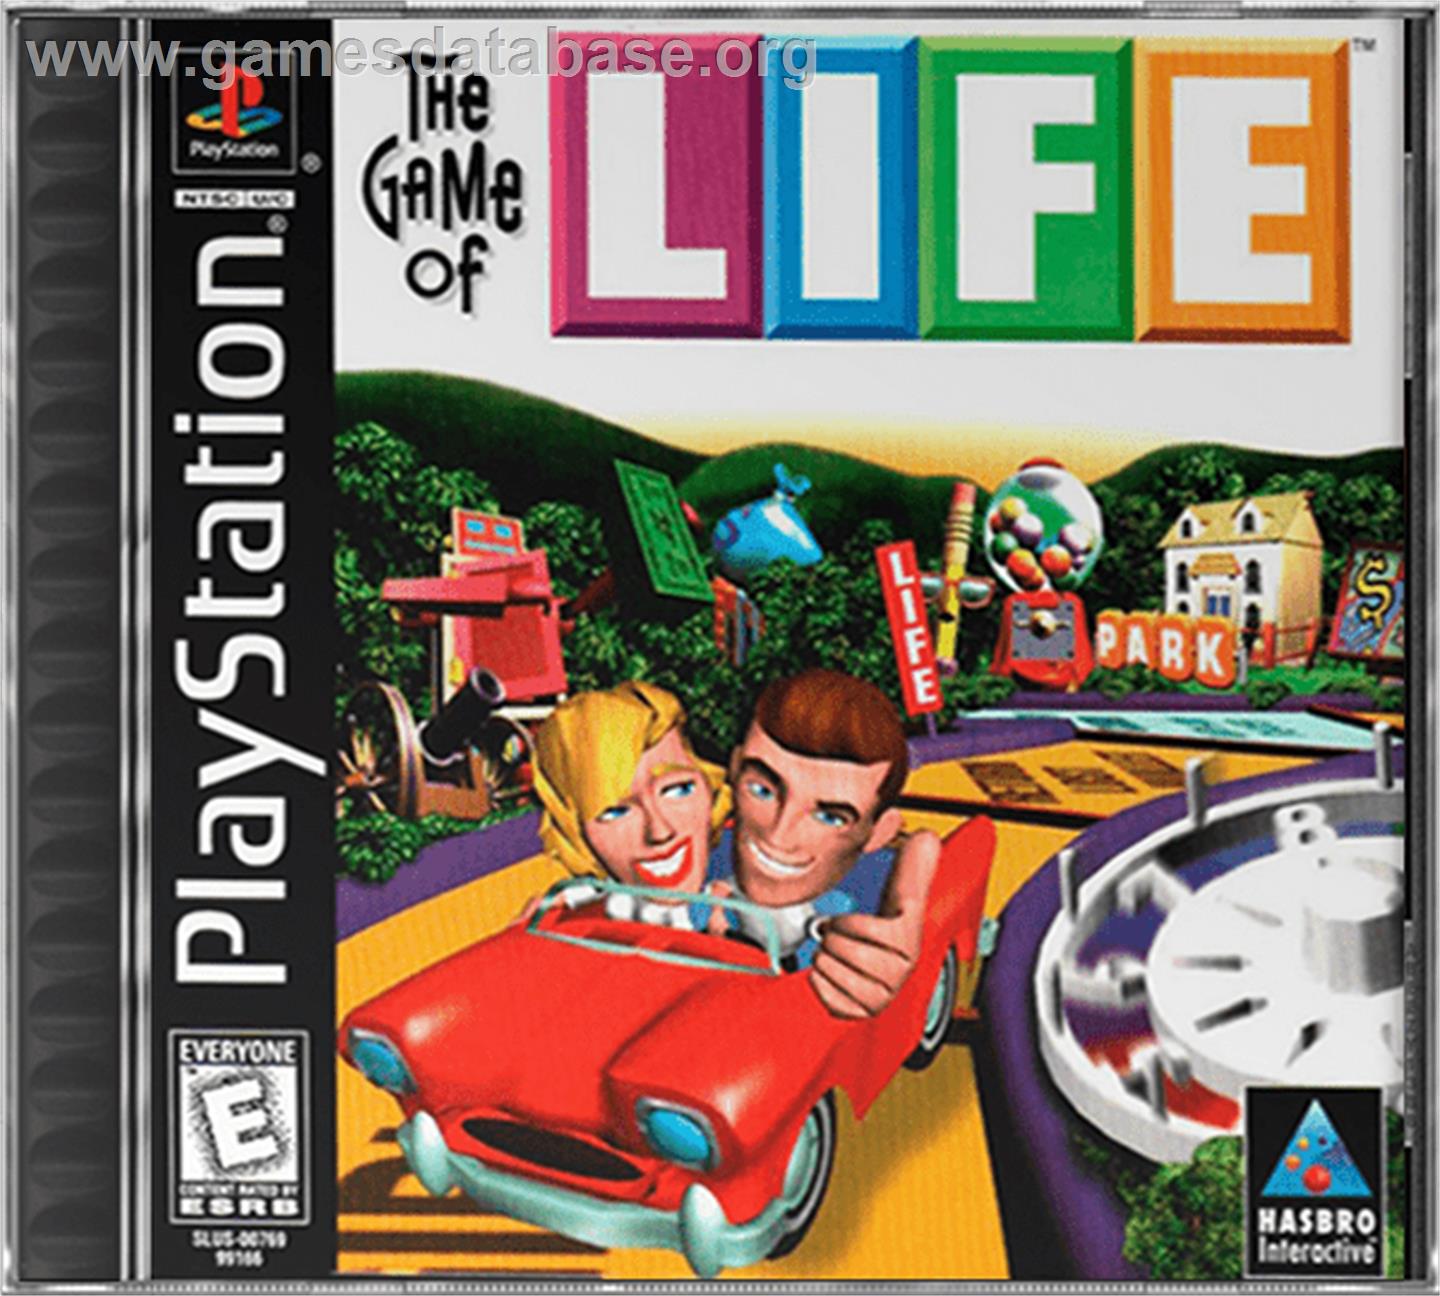 The Game of Life - Sony Playstation - Artwork - Box